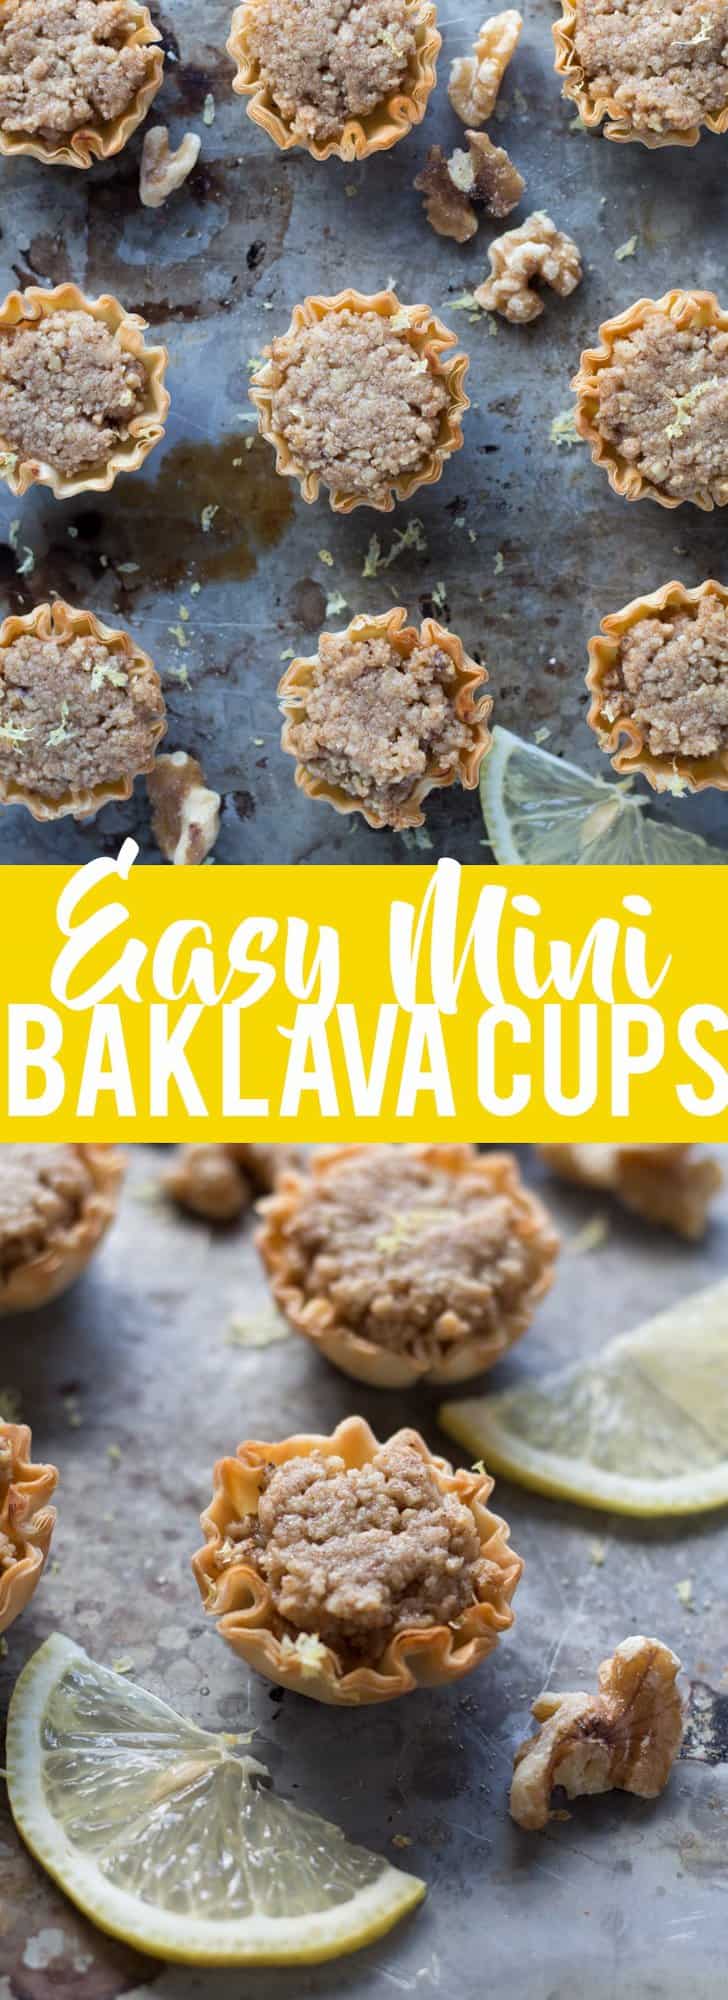 These Mini Baklava Cups are a cute, bite sized dessert with all the flavors of baklava - but without all the work! Only a few ingredients and 20 minutes will give you these perfect mini desserts!